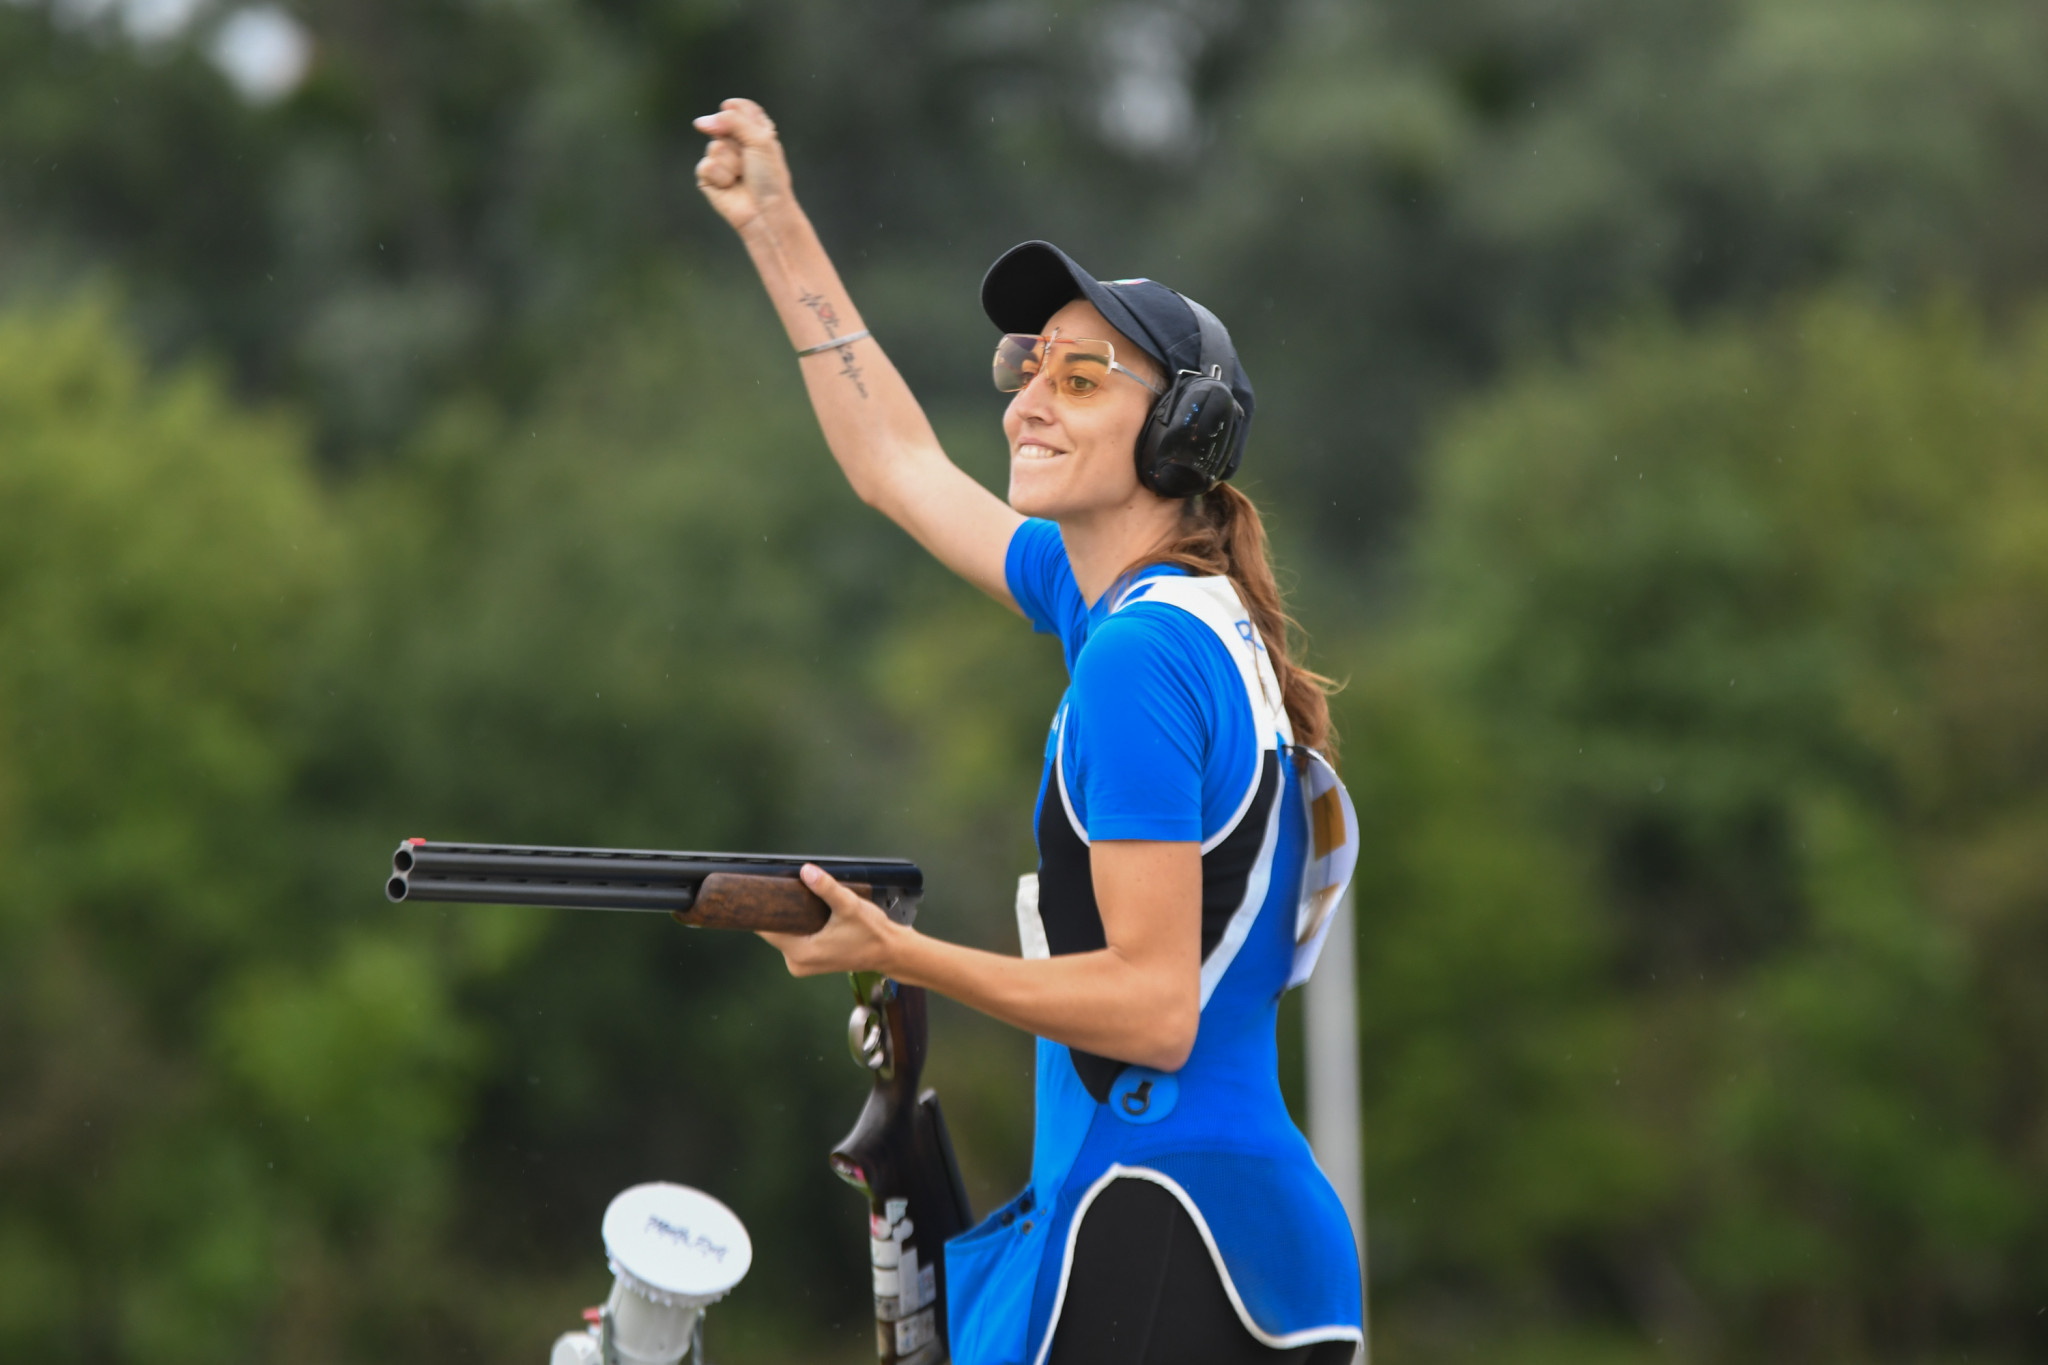 Italy's London 2012 Olympic gold medallist Jessica Rossi of Italy won women's trap gold and secured a Paris 2024 quota place ©Kraków-Małopolska 2023